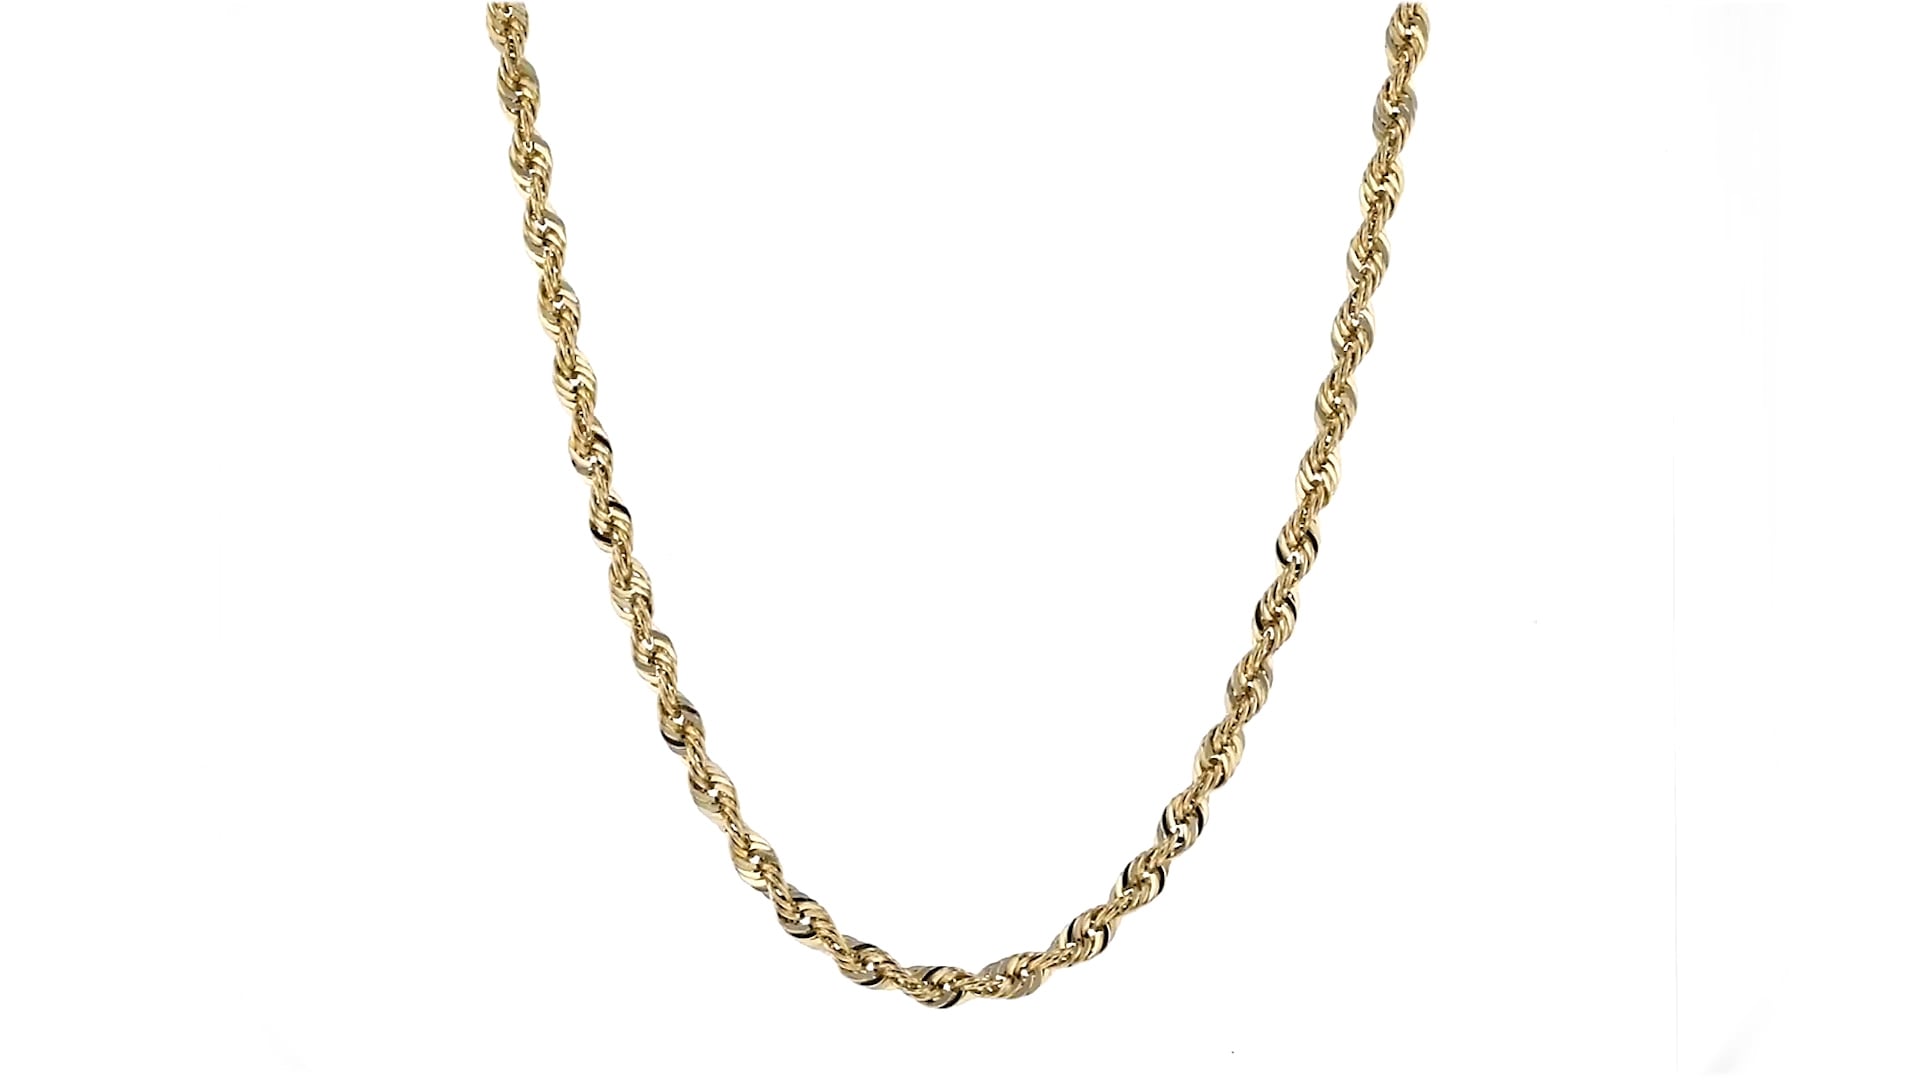 4mm 14kt Yellow Gold Rope Chain Necklace on Vimeo